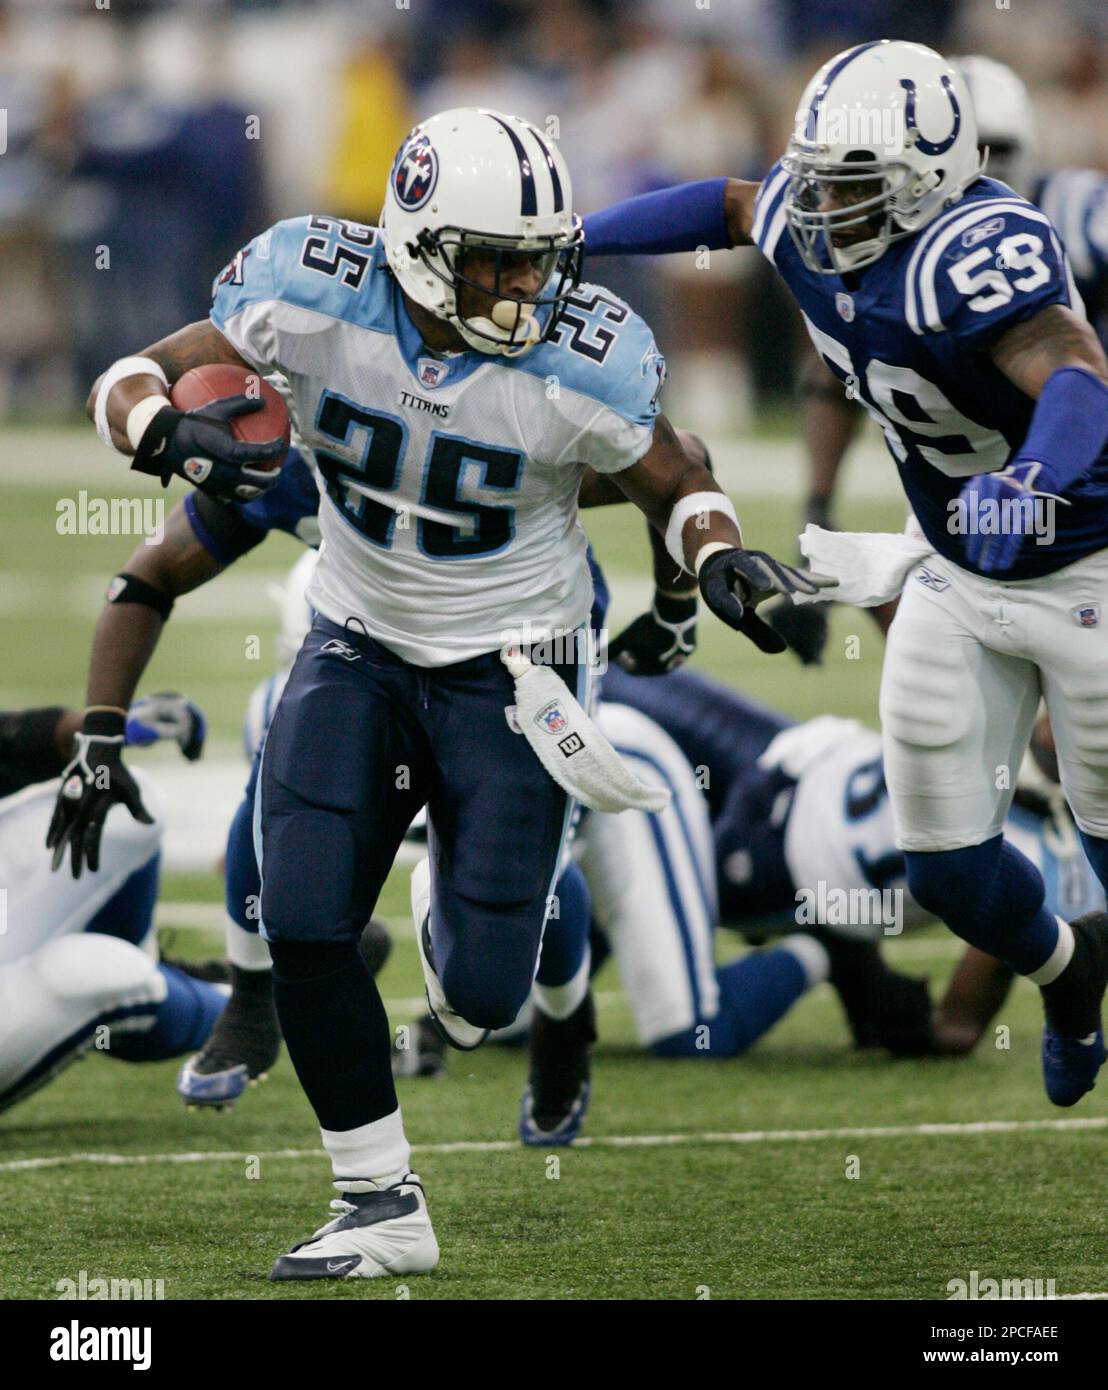 27 September 2009: Tennessee Titans #25 running back LenDale White  antagonizes the crowd. The New York Jets defeated the Tennessee Titans  24-17 at Giants Stadium in Rutherford, New Jersey. In honor of